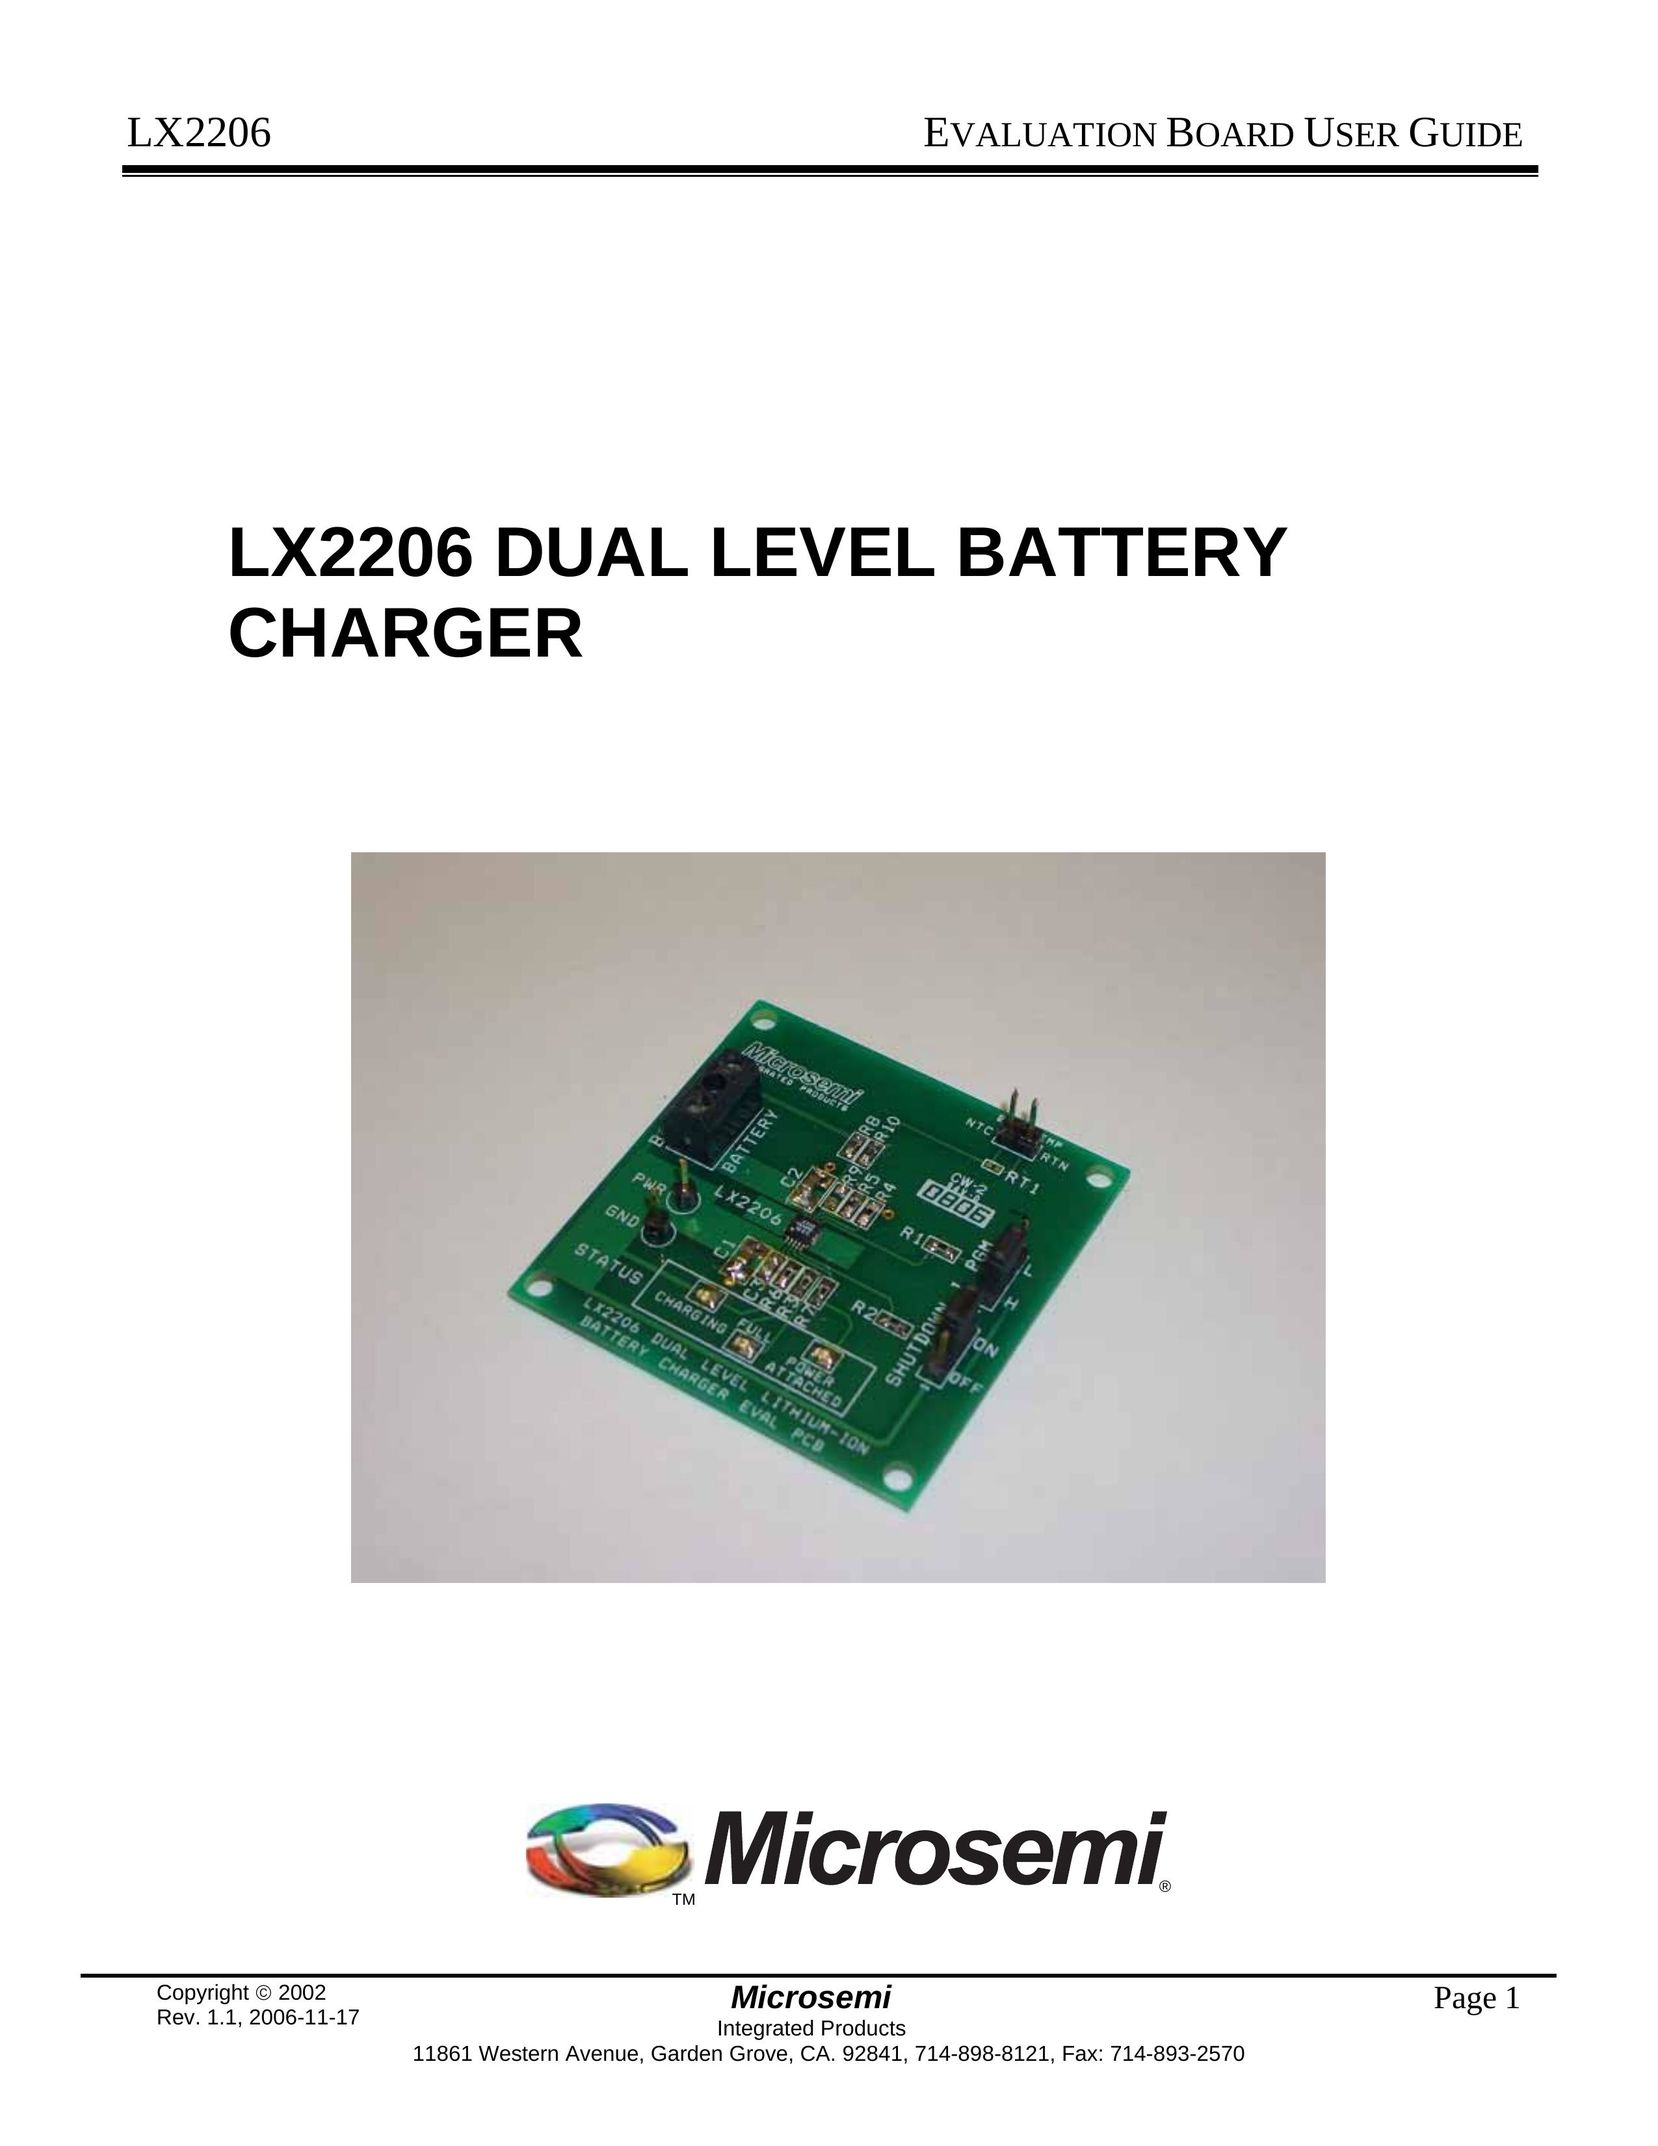 PowerDsine LX2206 Battery Charger User Manual